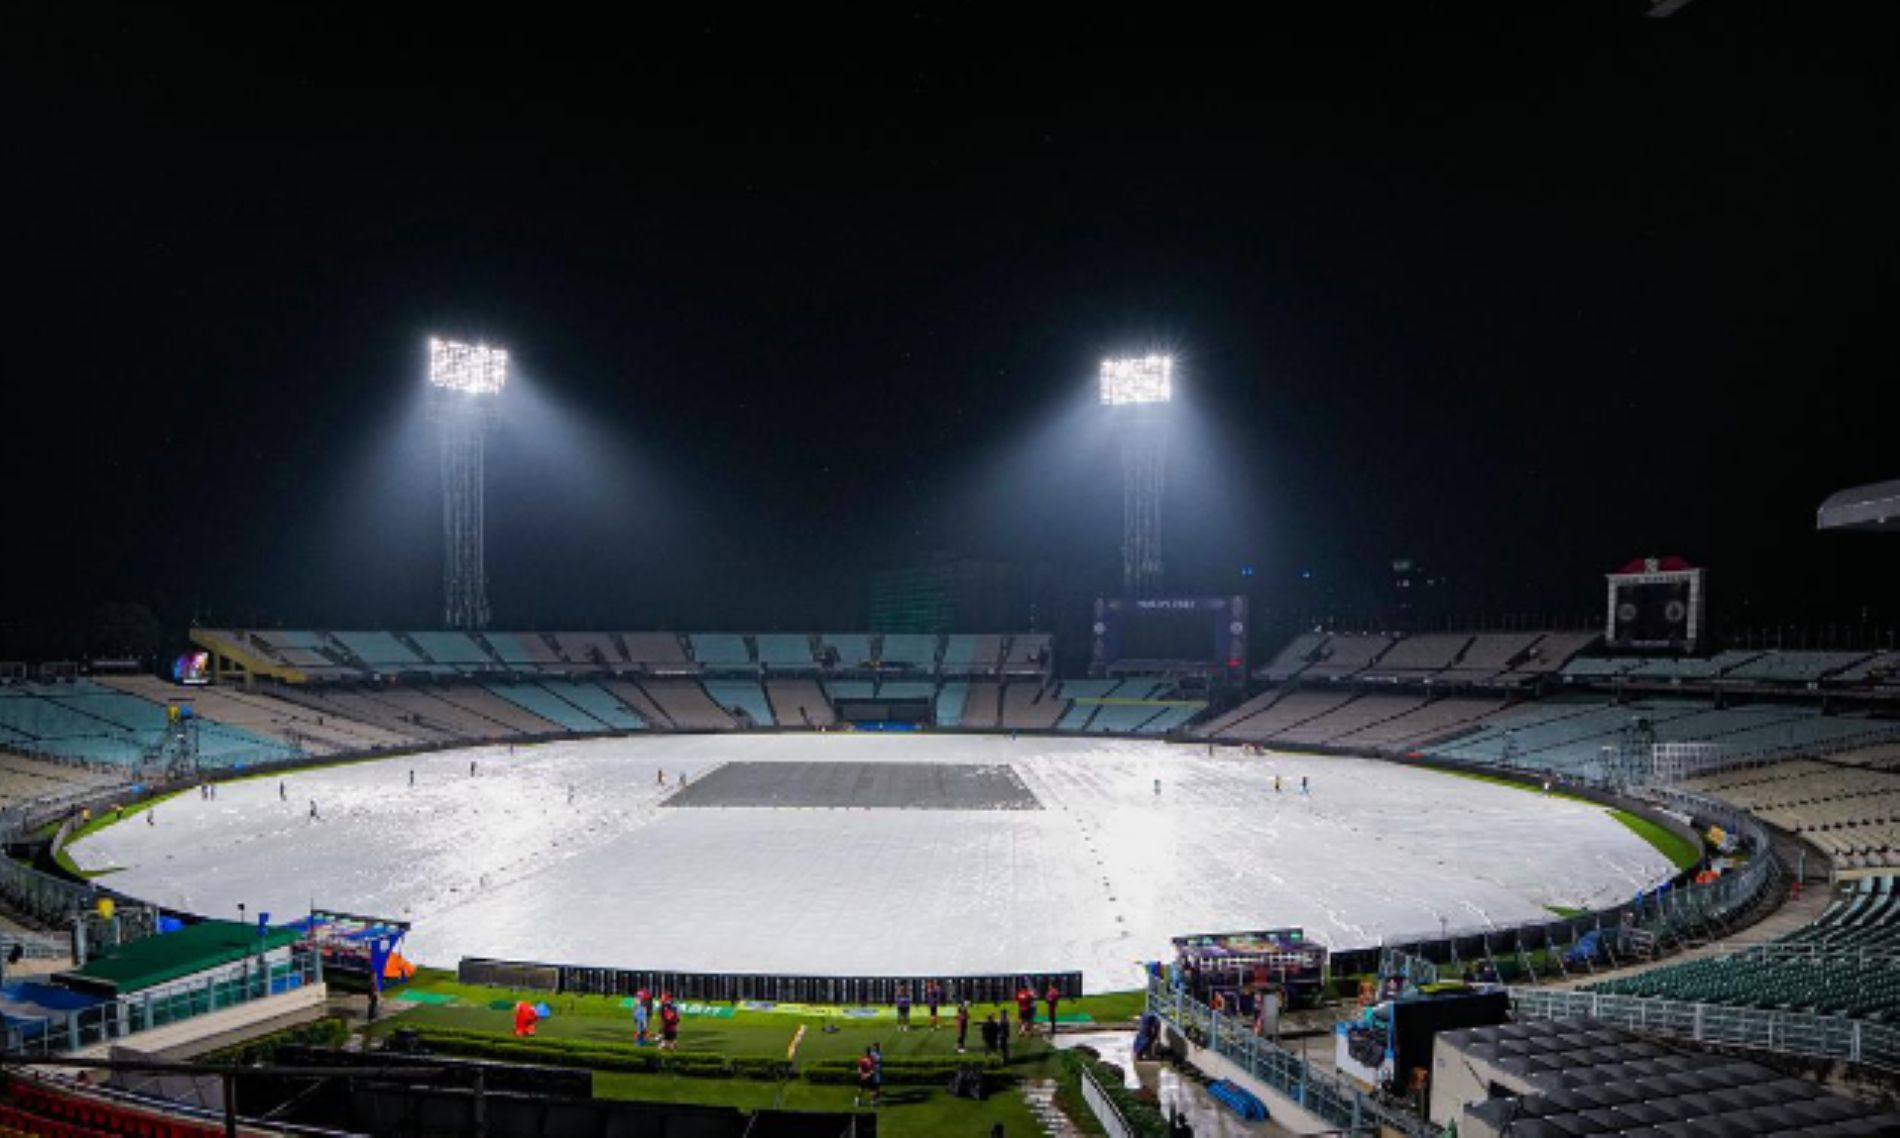 The Eden Gardens is fully covered during rain.